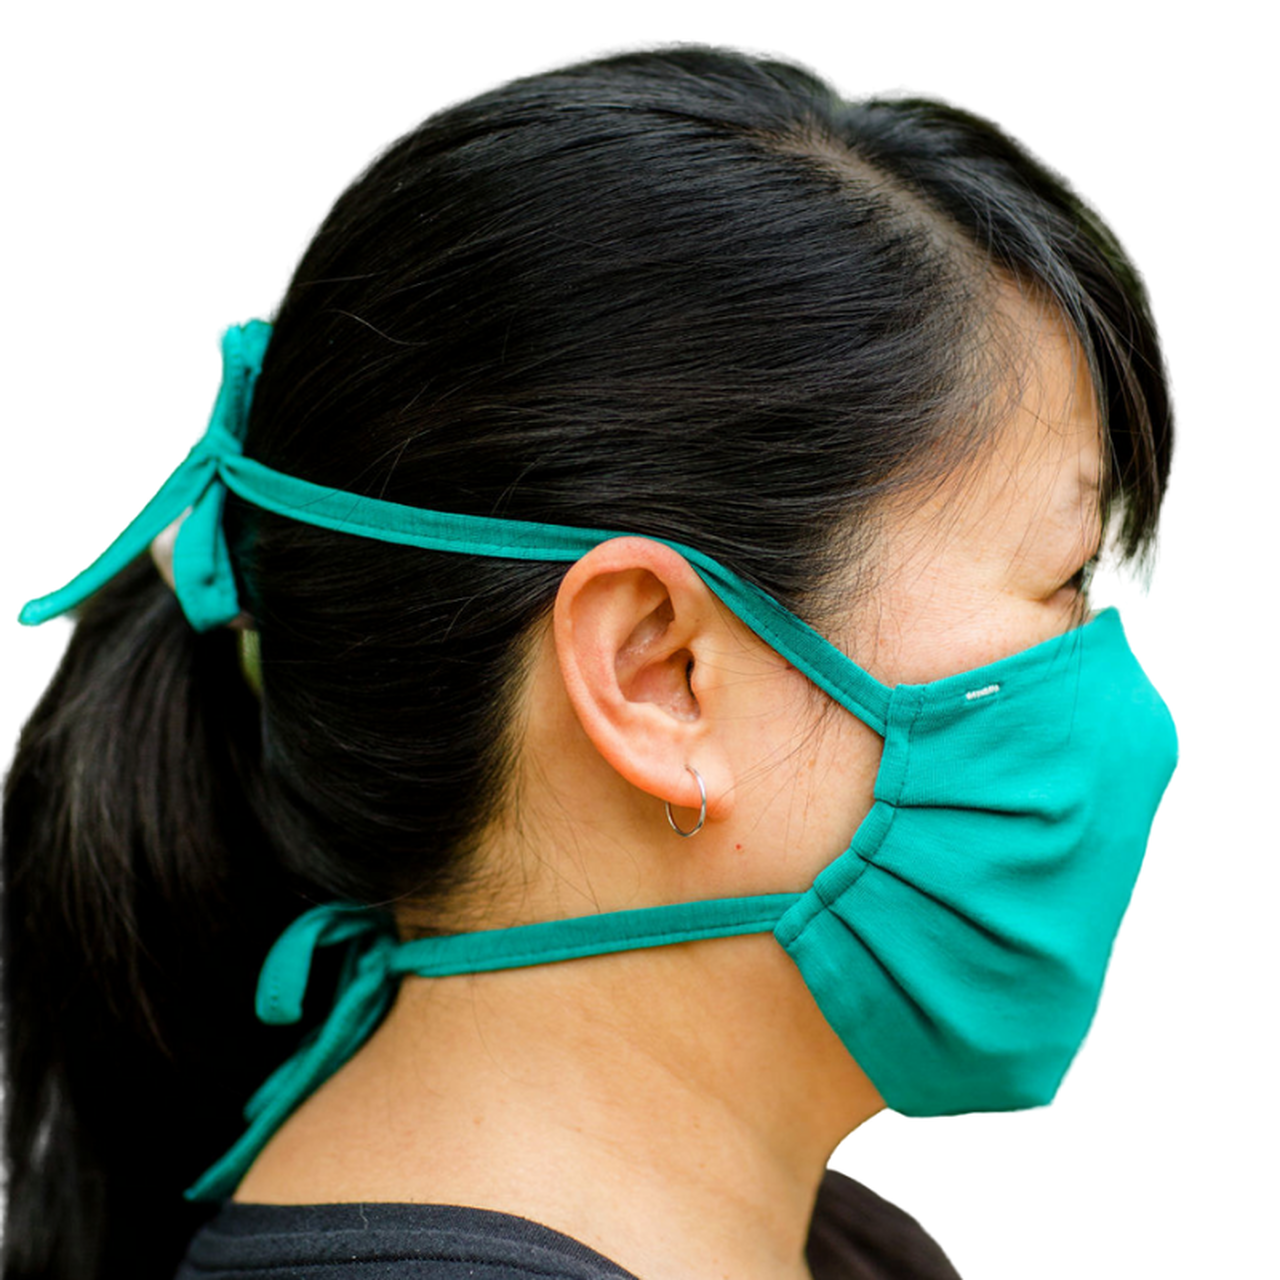 Remedywear Antimicrobial Face Mask for Sensitive Skin